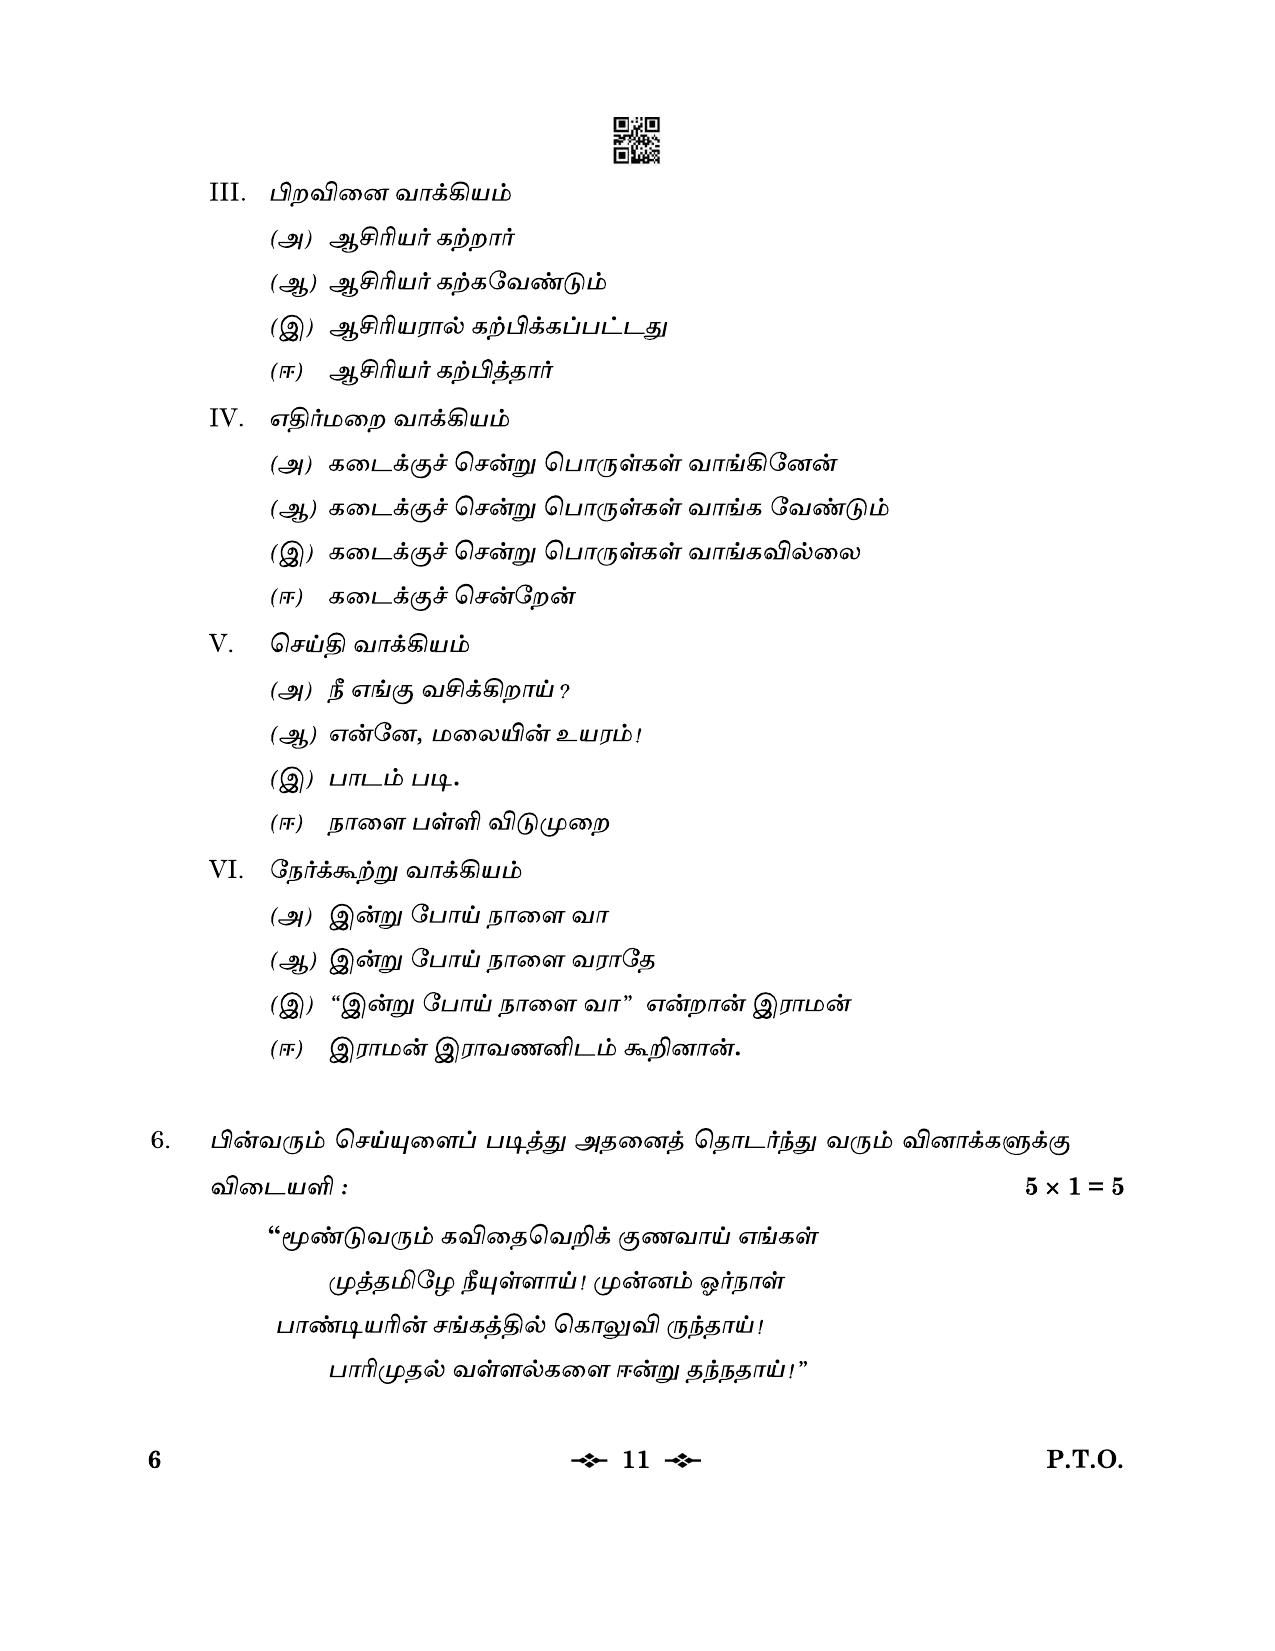 CBSE Class 12 6_Tamil 2023 Question Paper - Page 11